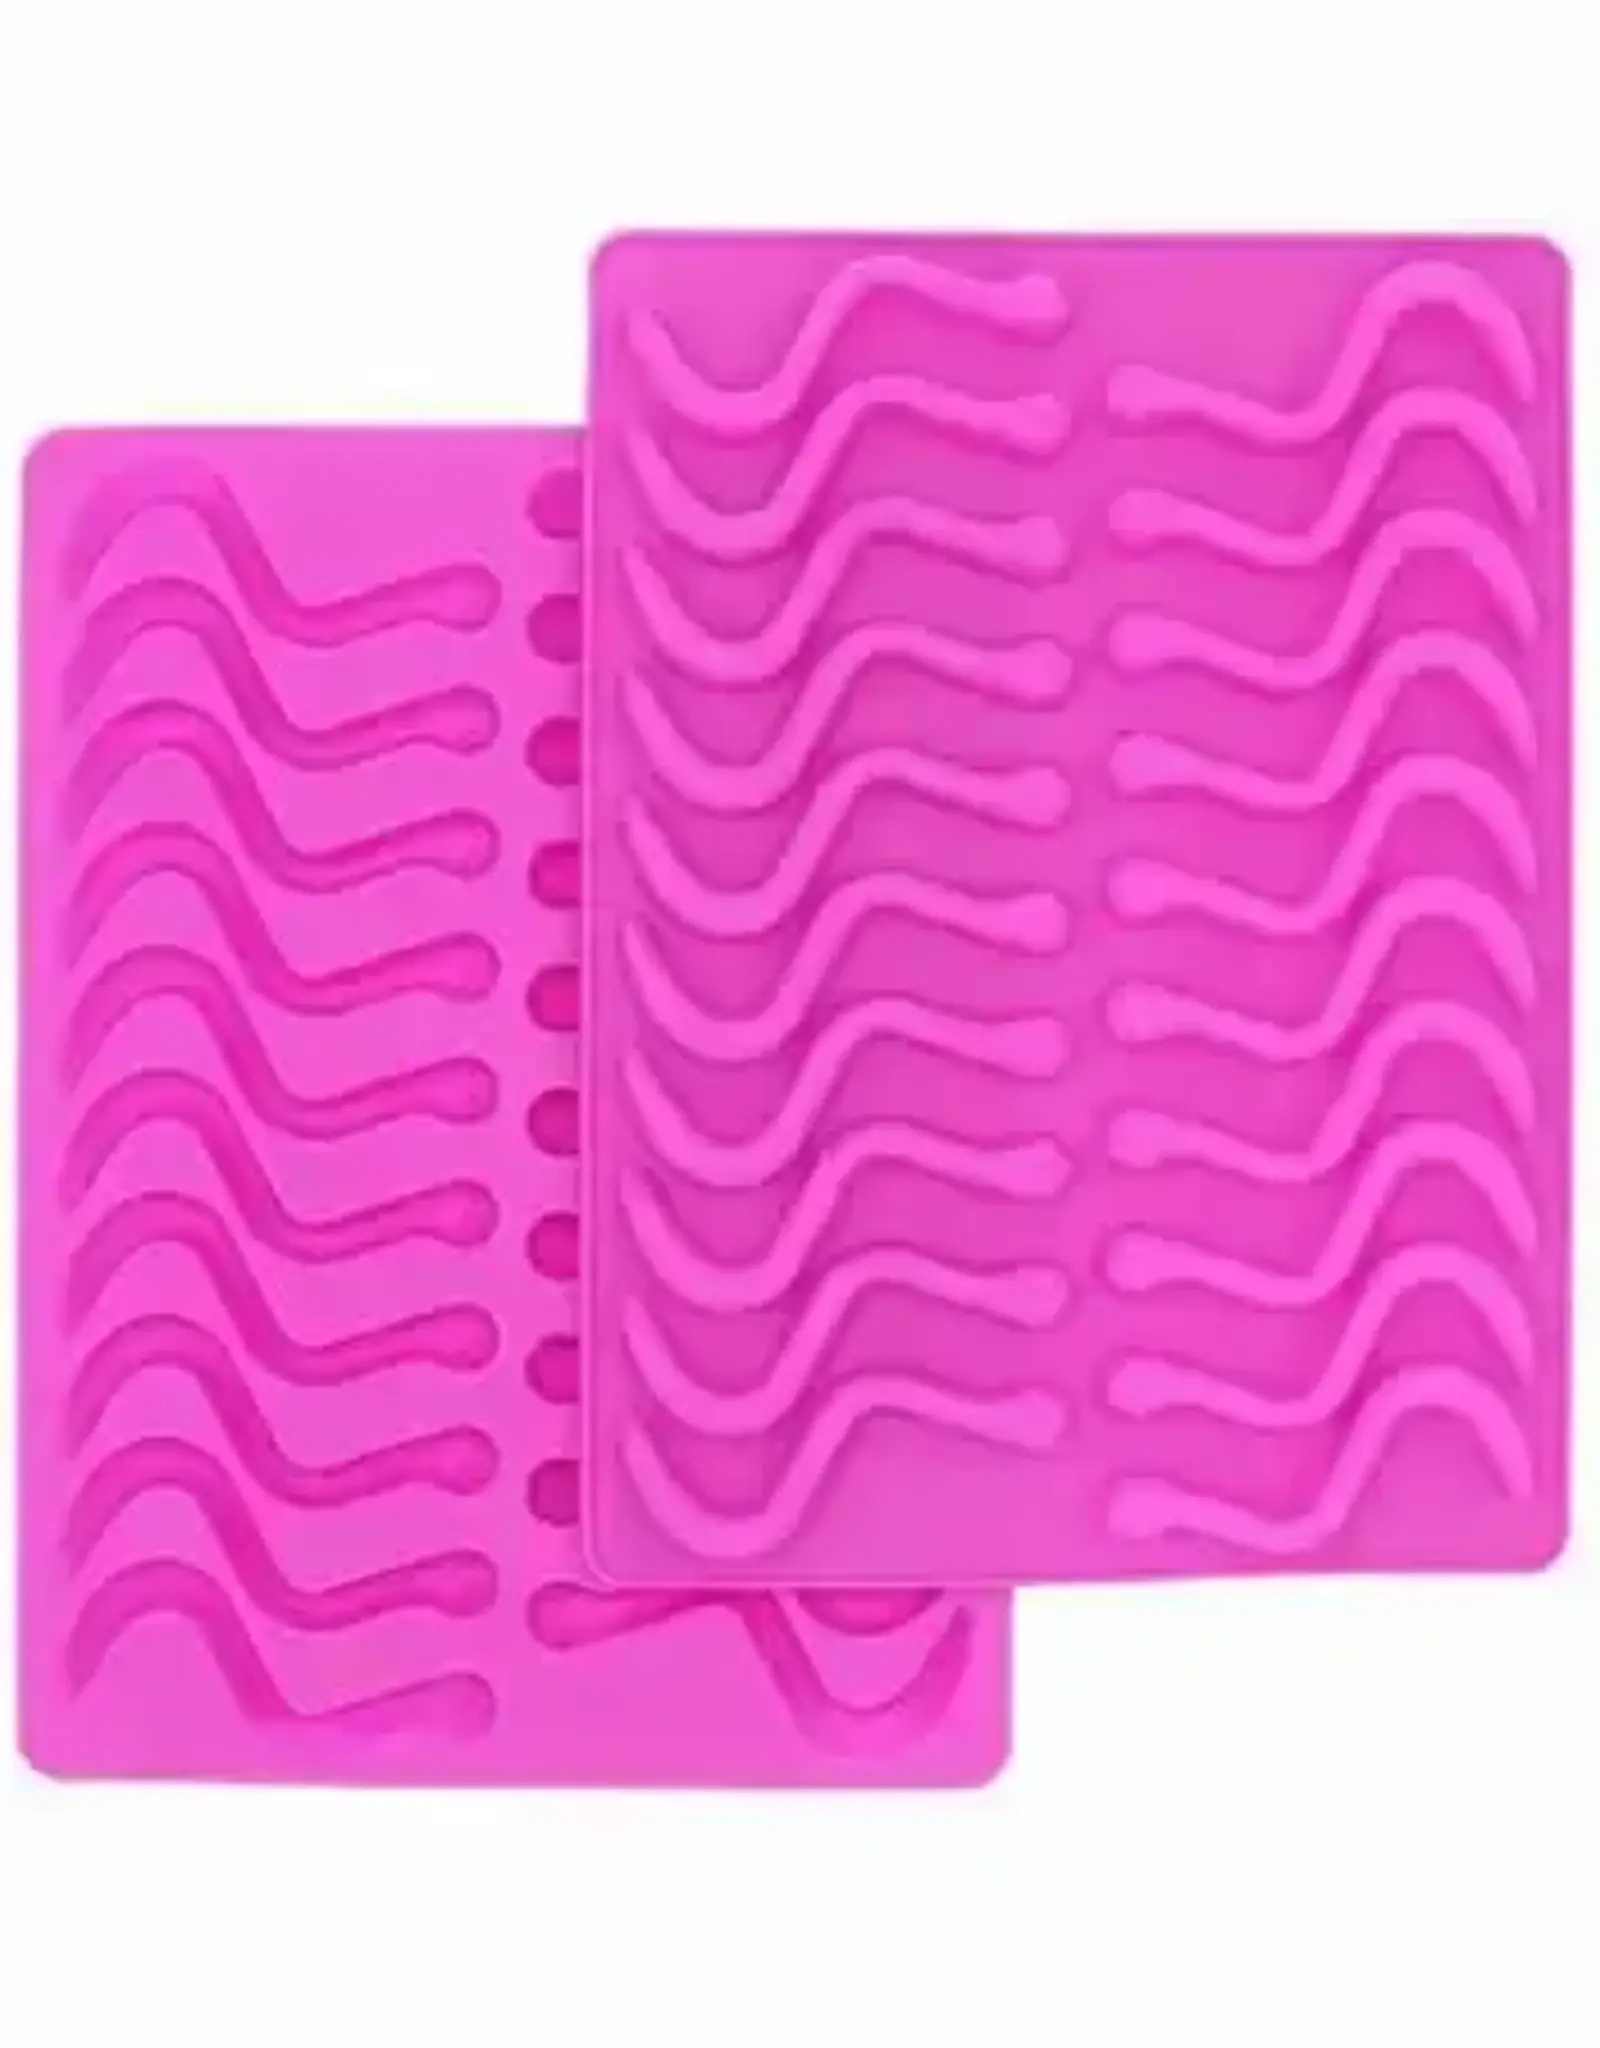 SILICONE GUMMY WORM MOLD 2 Pack